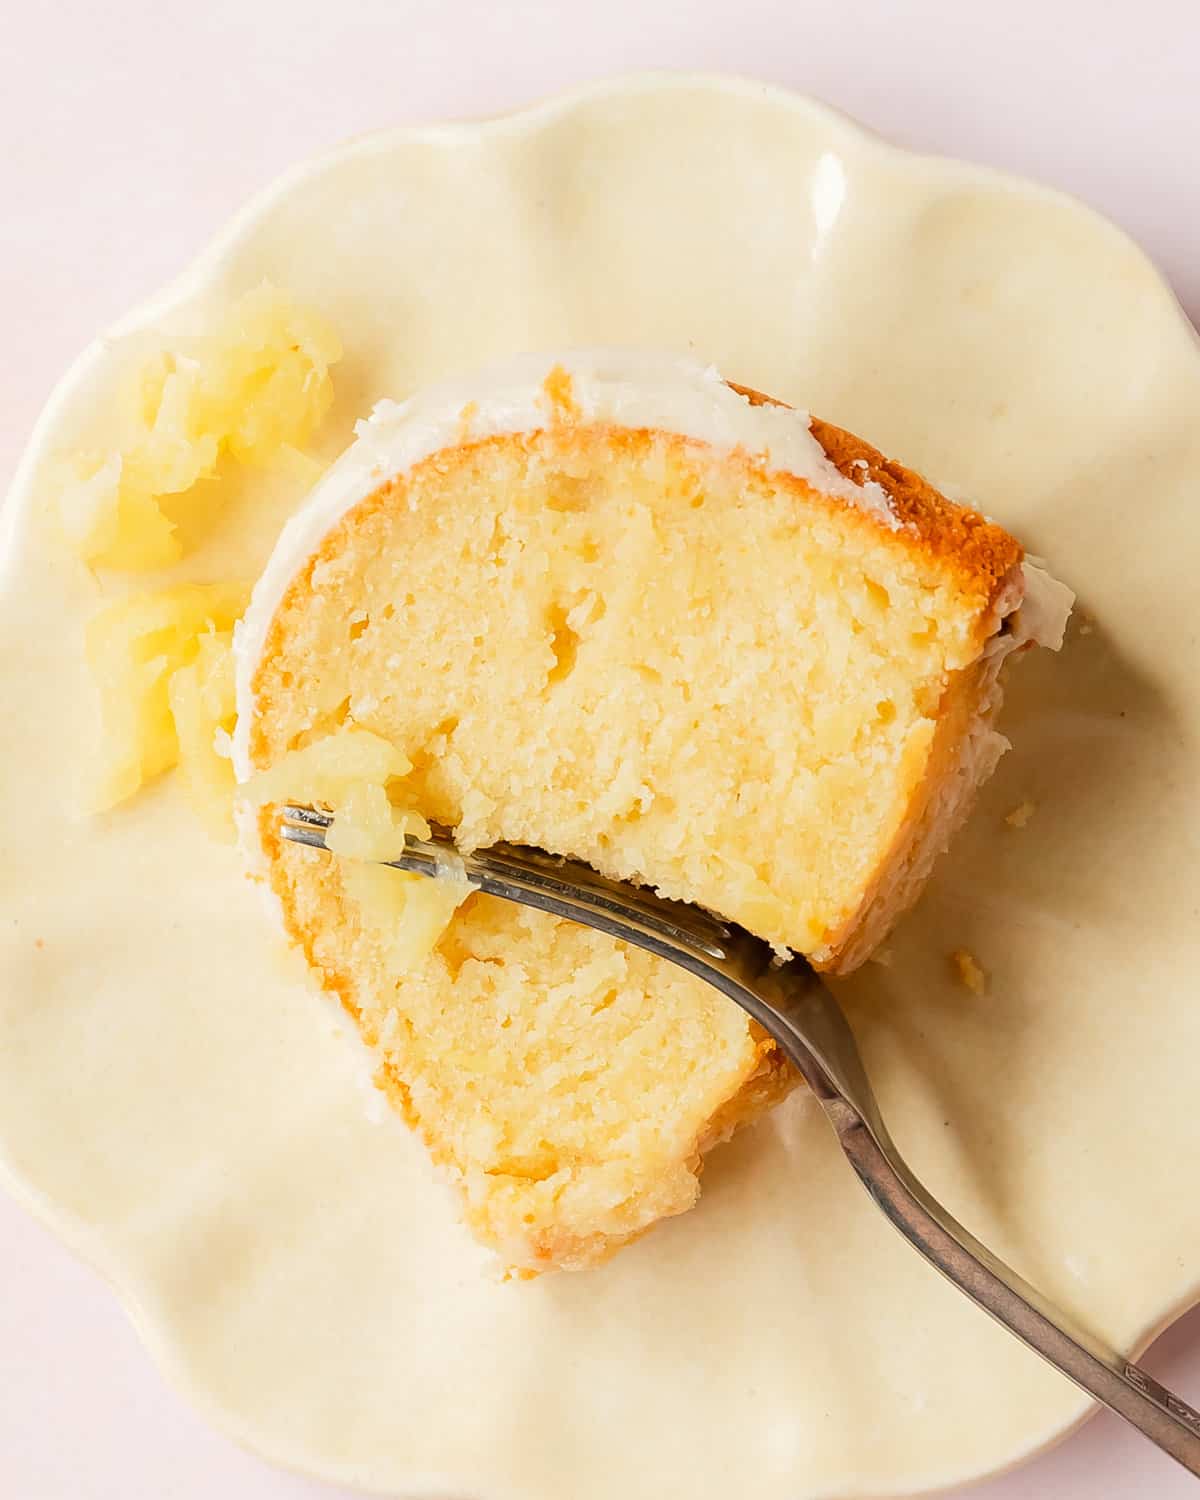 This pineapple pound cake is a rich, dense and tender cake filled with crushed sweet, tropical pineapple. Top with this pineapple cake with a bright and creamy pineapple glaze. Enjoy this easy to make, tropical twist on old fashioned pound cake for breakfast, brunch or dessert. 